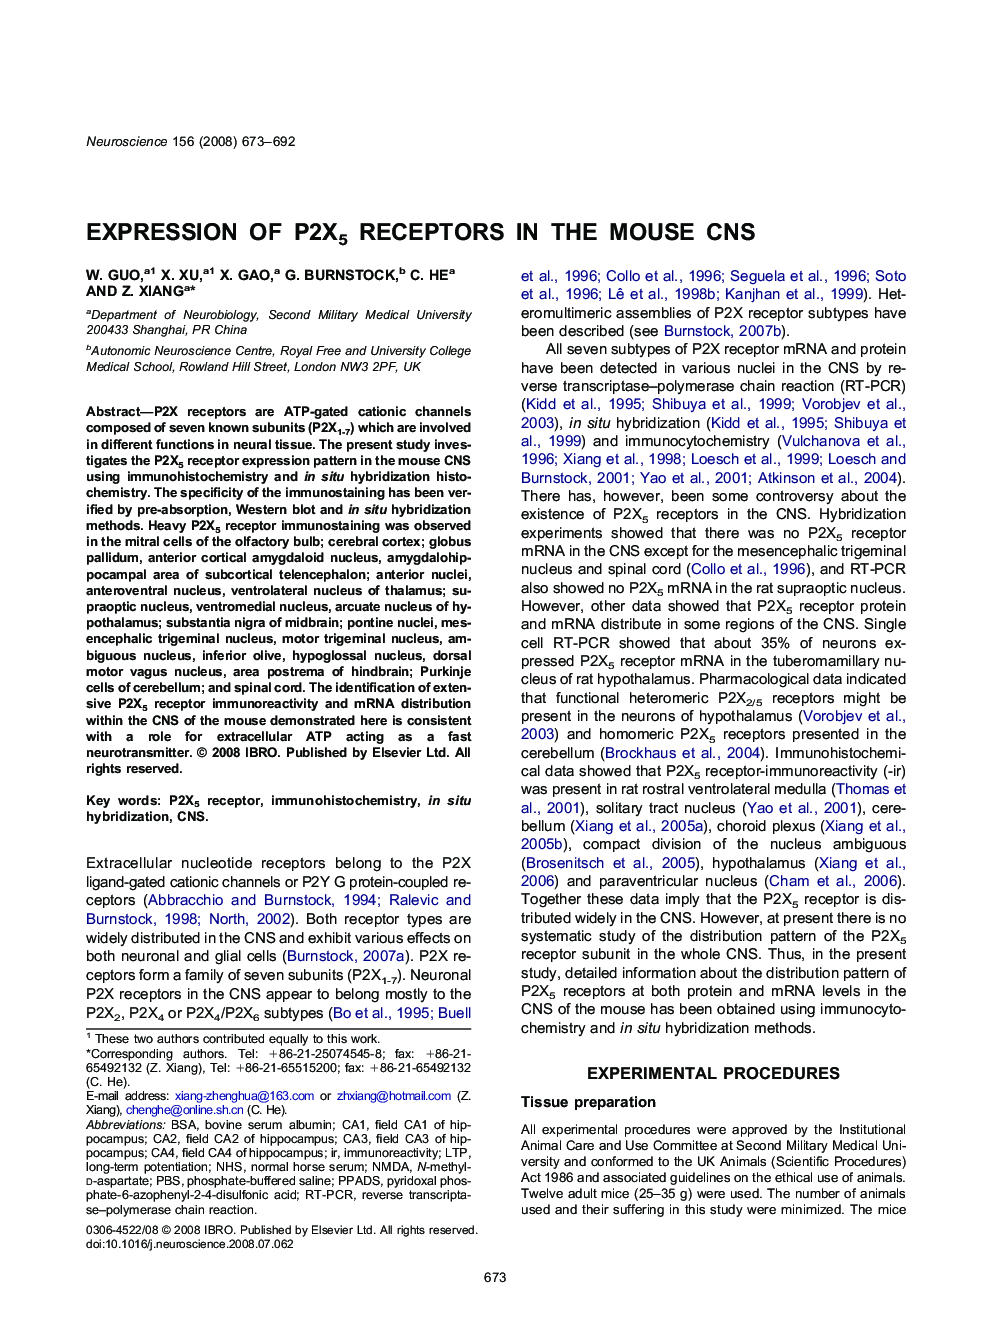 Expression of P2X5 receptors in the mouse CNS